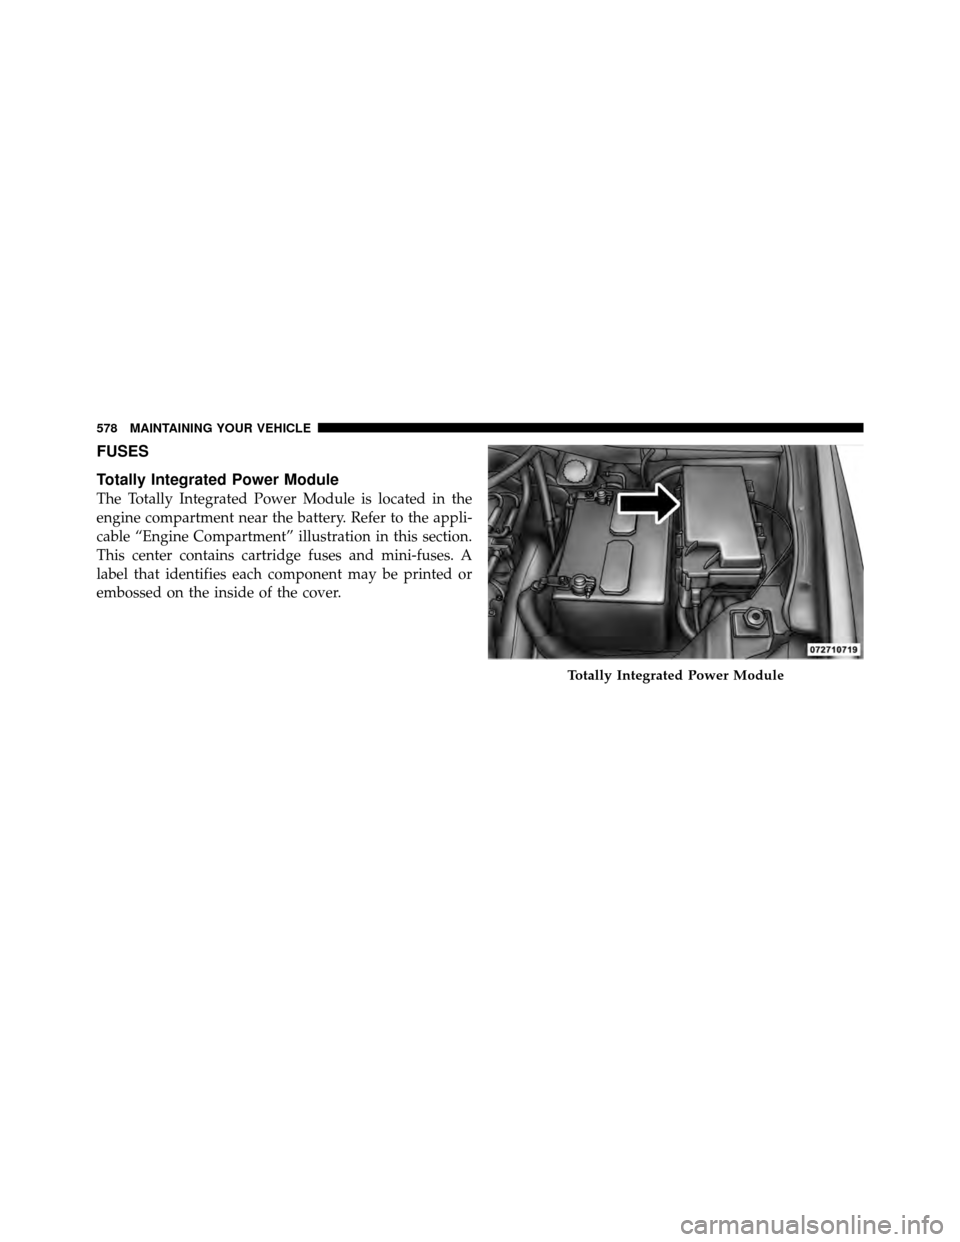 DODGE GRAND CARAVAN 2012 5.G Owners Manual FUSES
Totally Integrated Power Module
The Totally Integrated Power Module is located in the
engine compartment near the battery. Refer to the appli-
cable “Engine Compartment” illustration in this